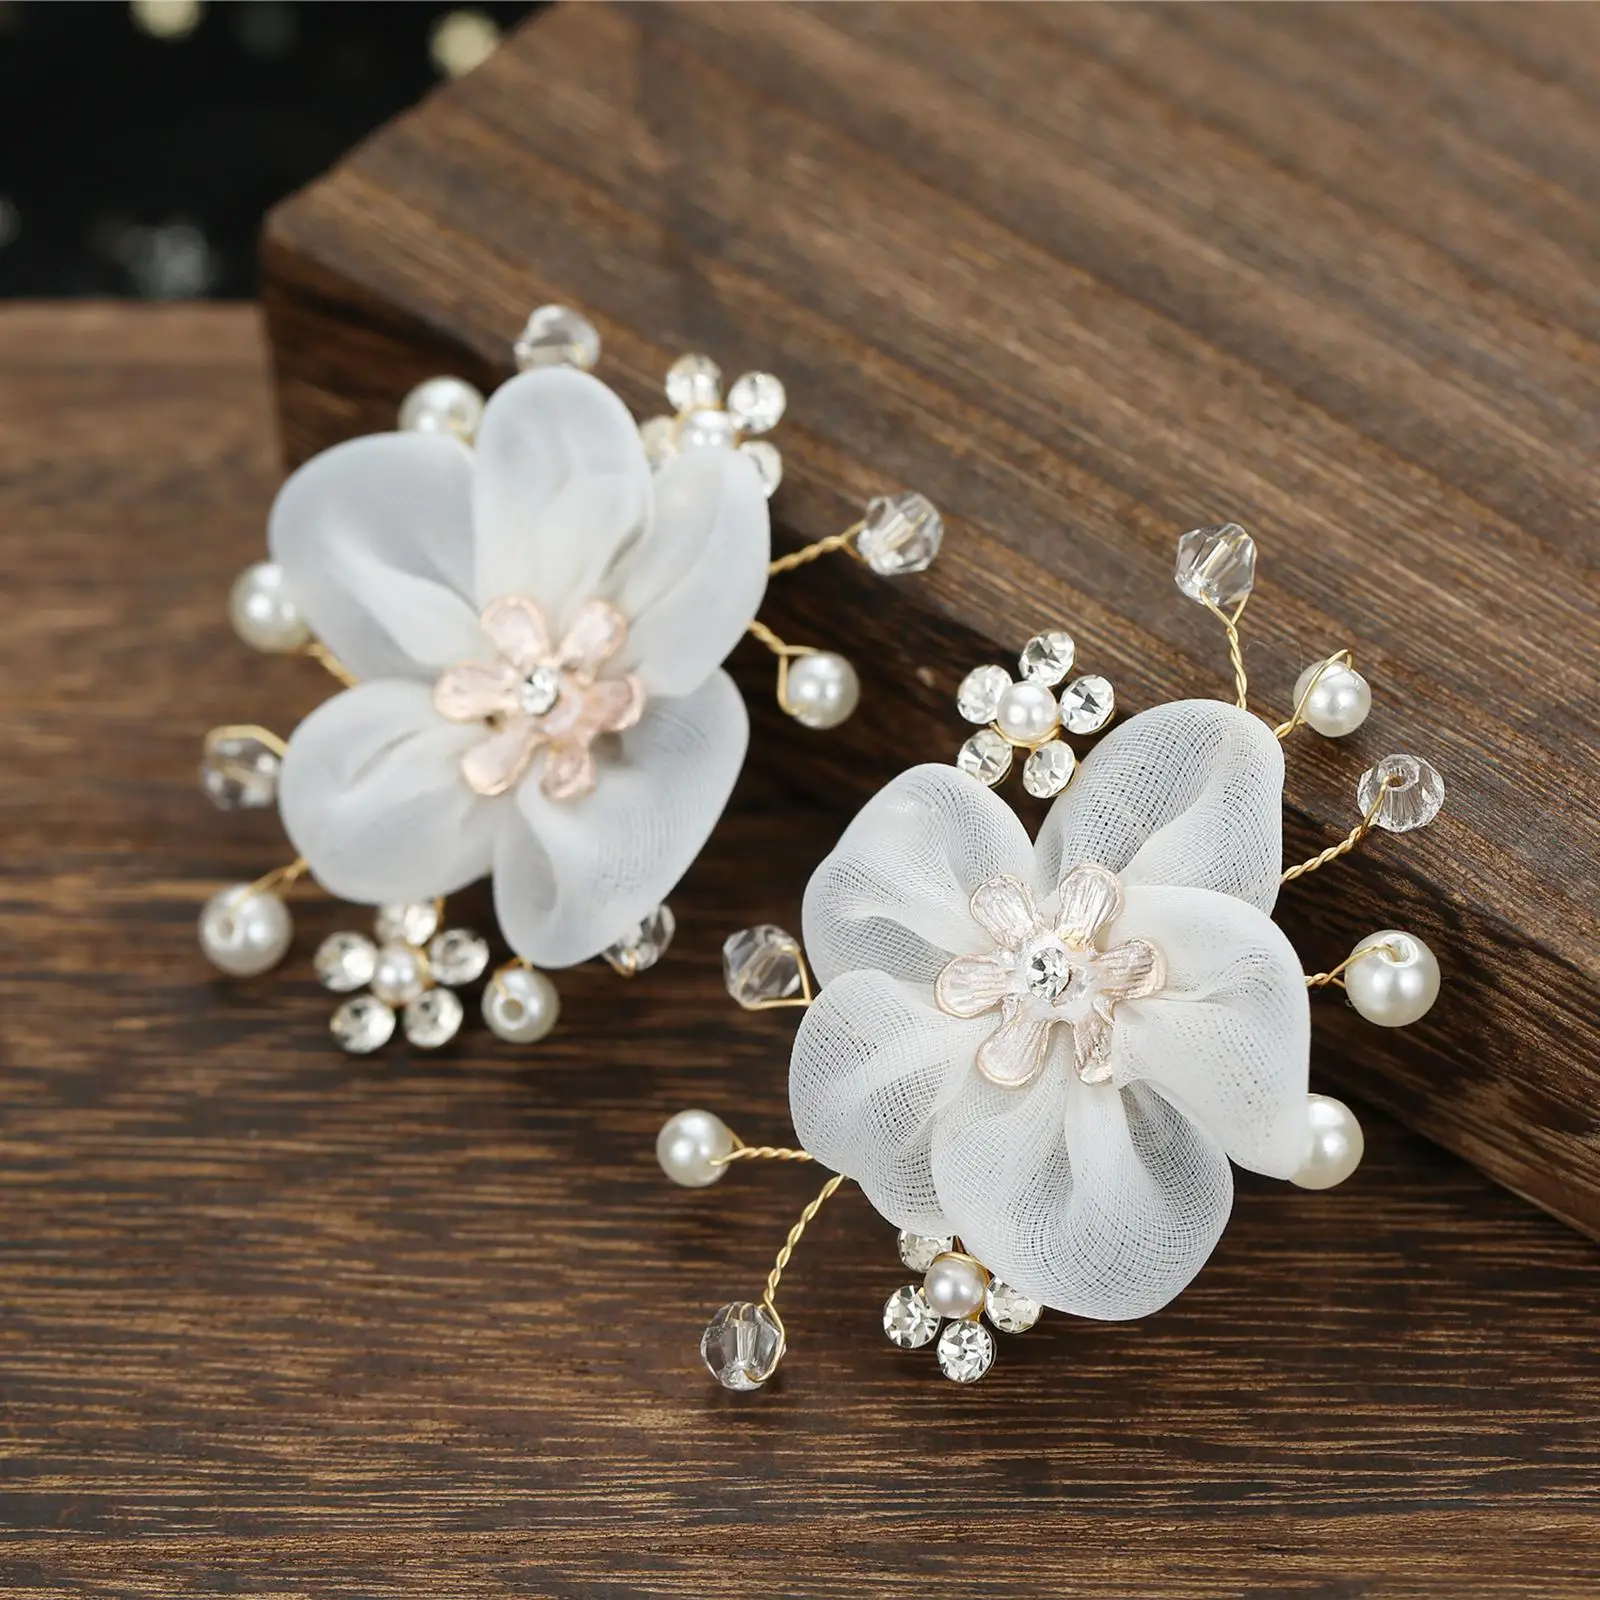 2Pcs Fabric Flower Shoe Clips Bridal Rhinestone Crystal Beaded Floral Remove Garment Accessories Charms Decoration for Wedding